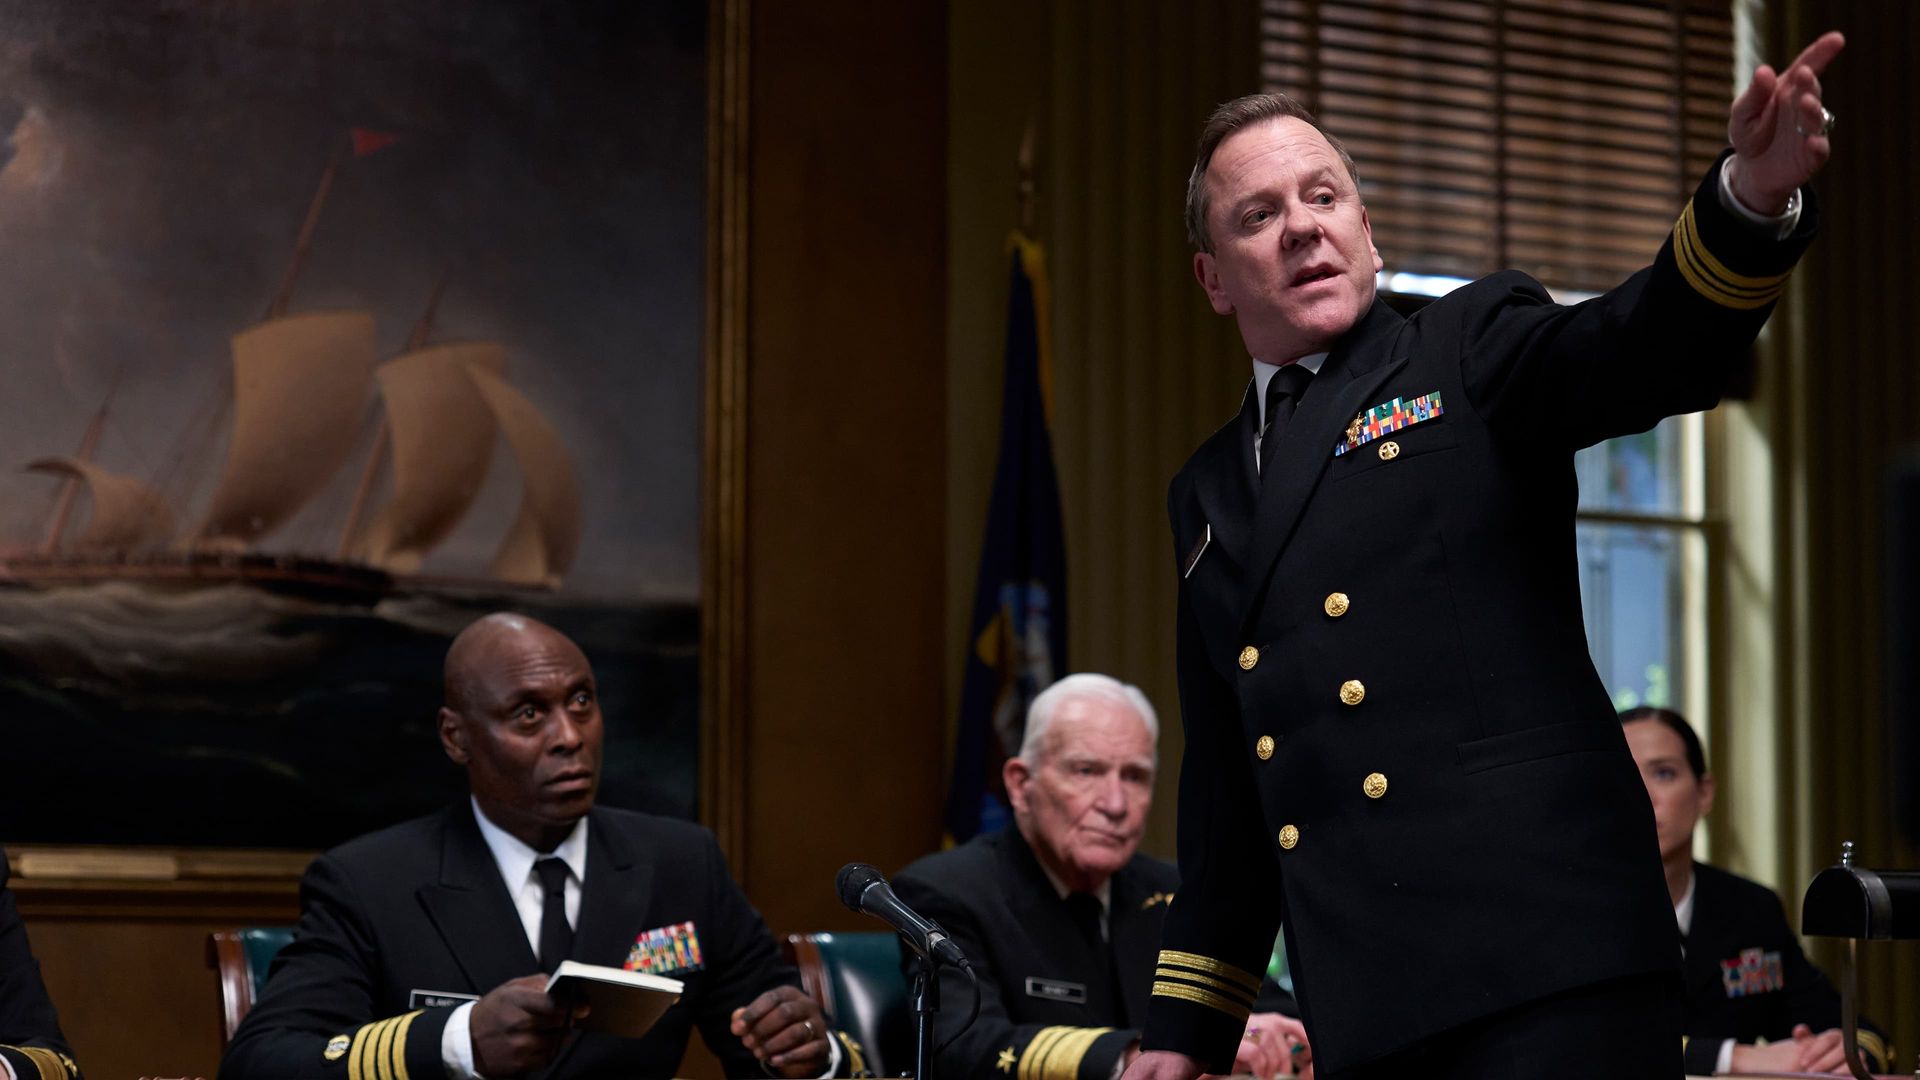 The Caine Mutiny Court-Martial background